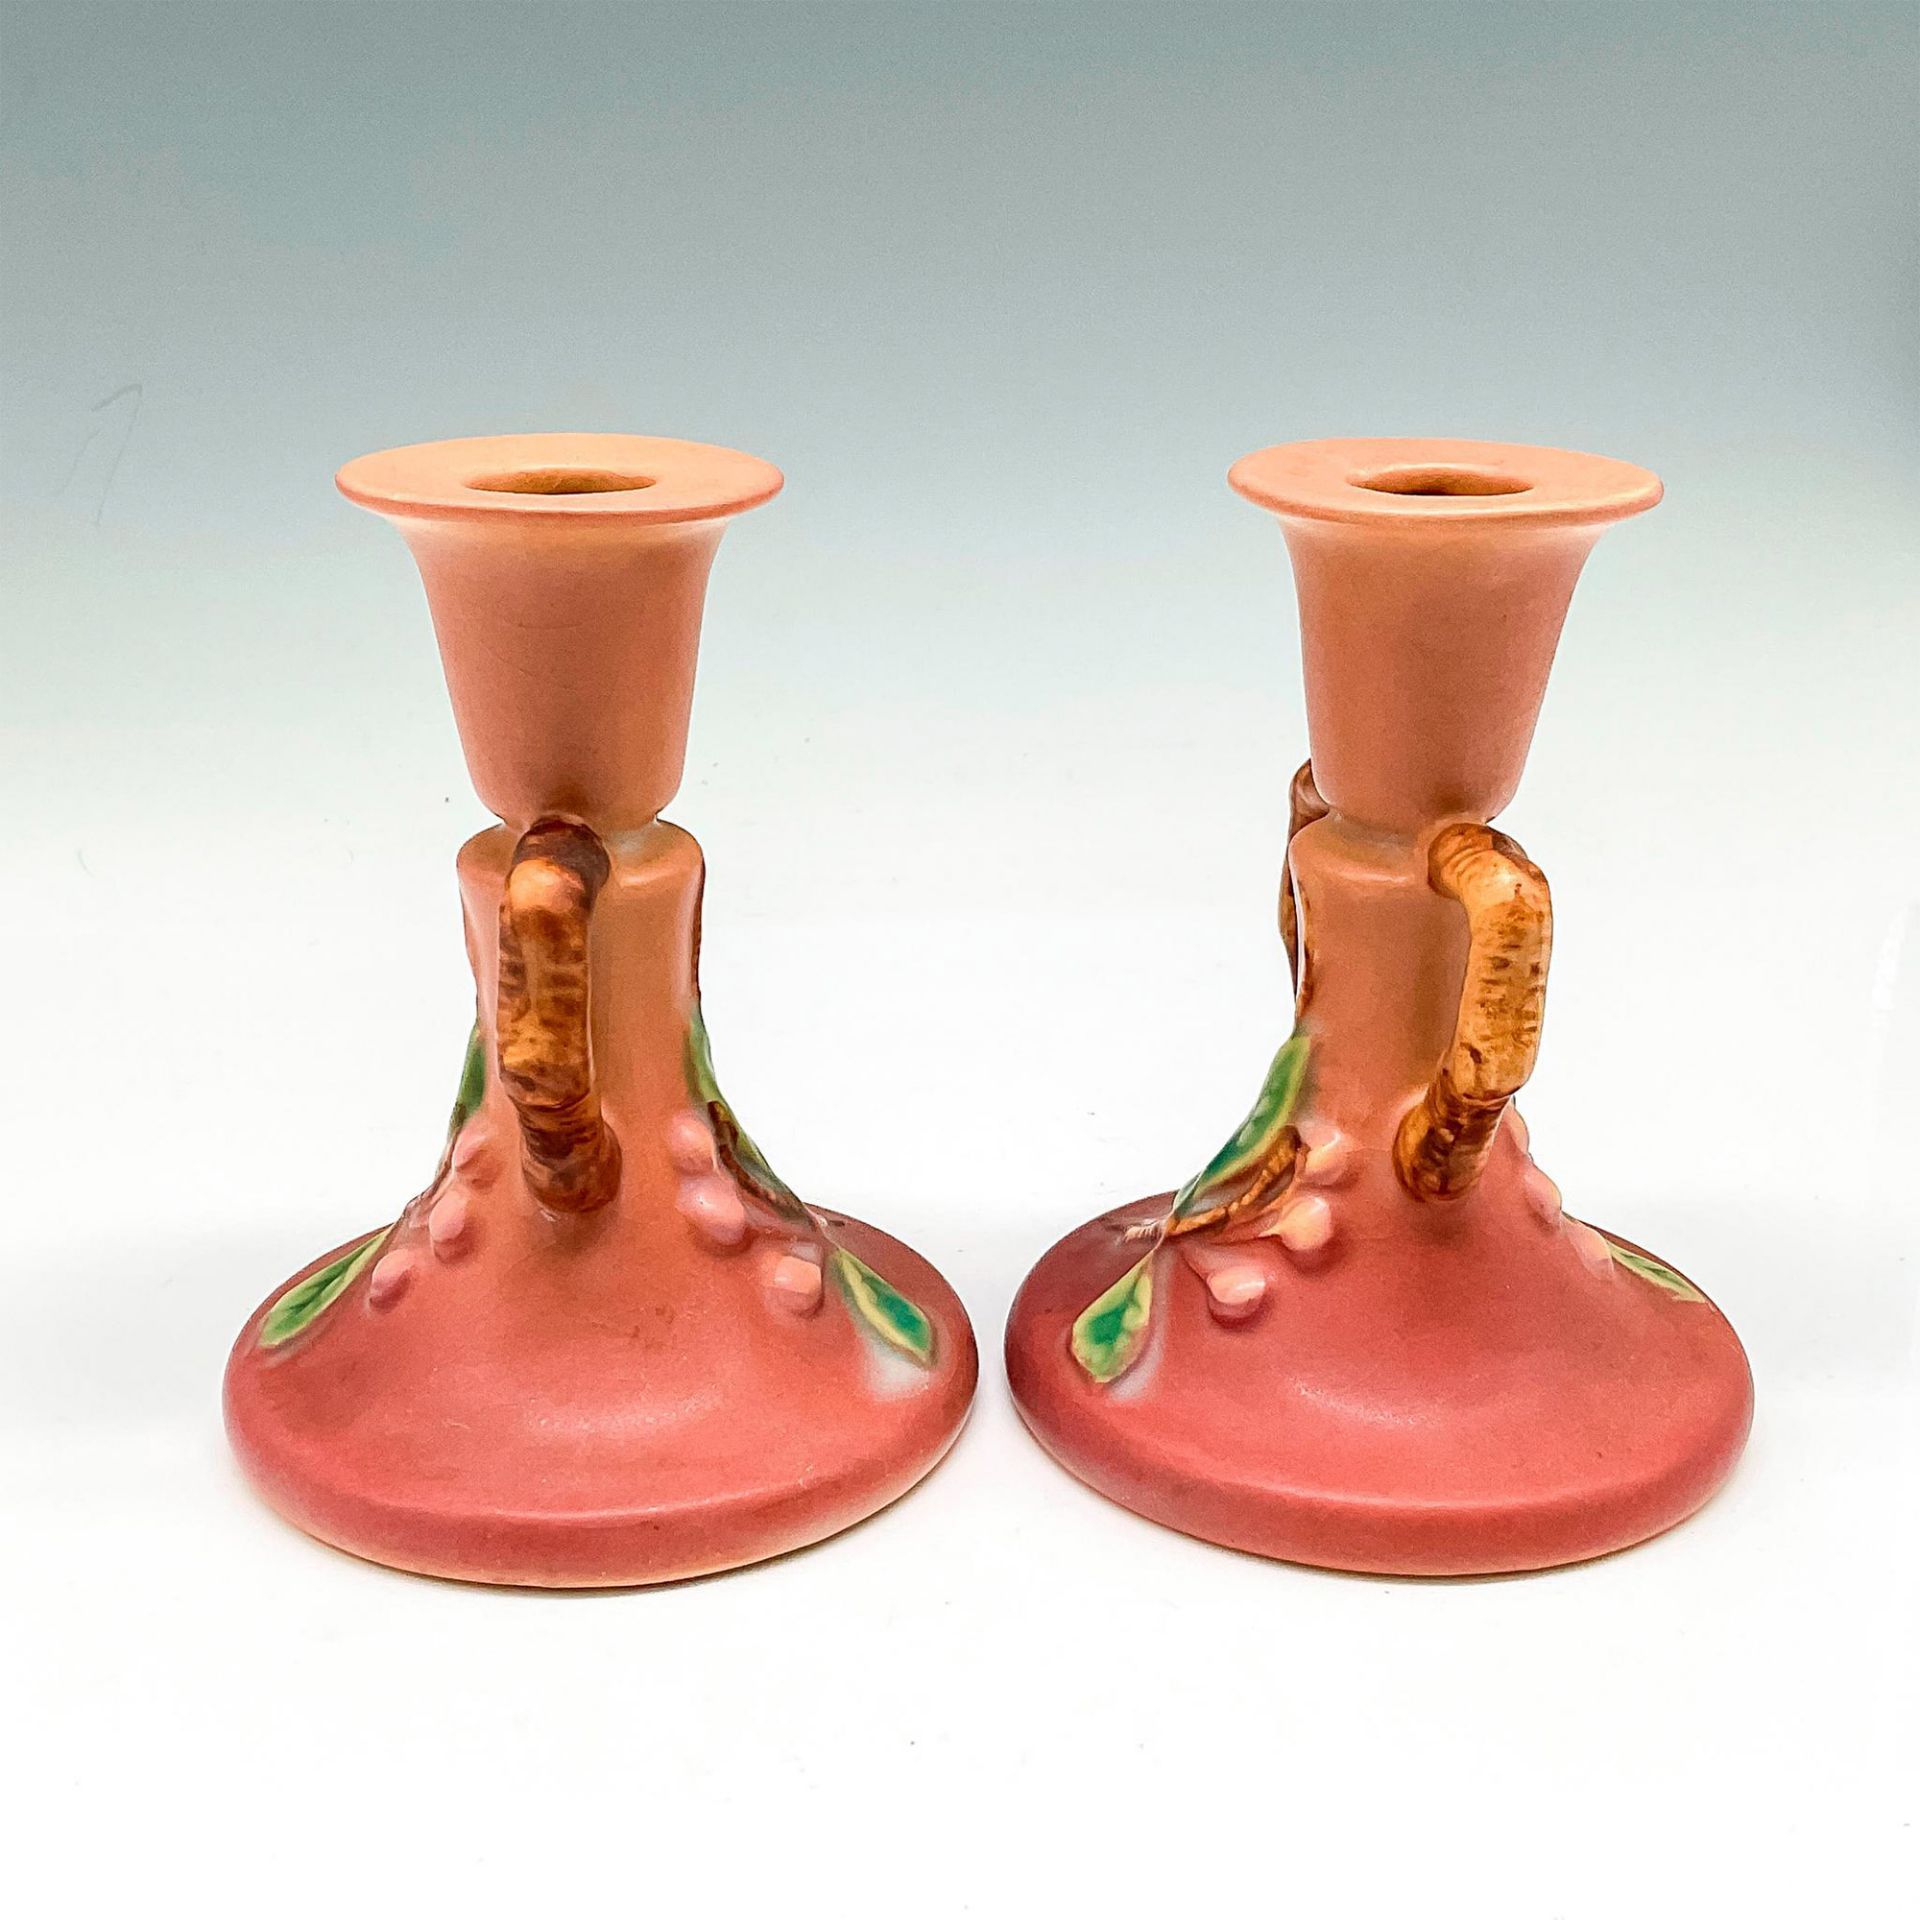 2pc Roseville Pottery Candle Holders, Snowberry Pink - Image 2 of 3